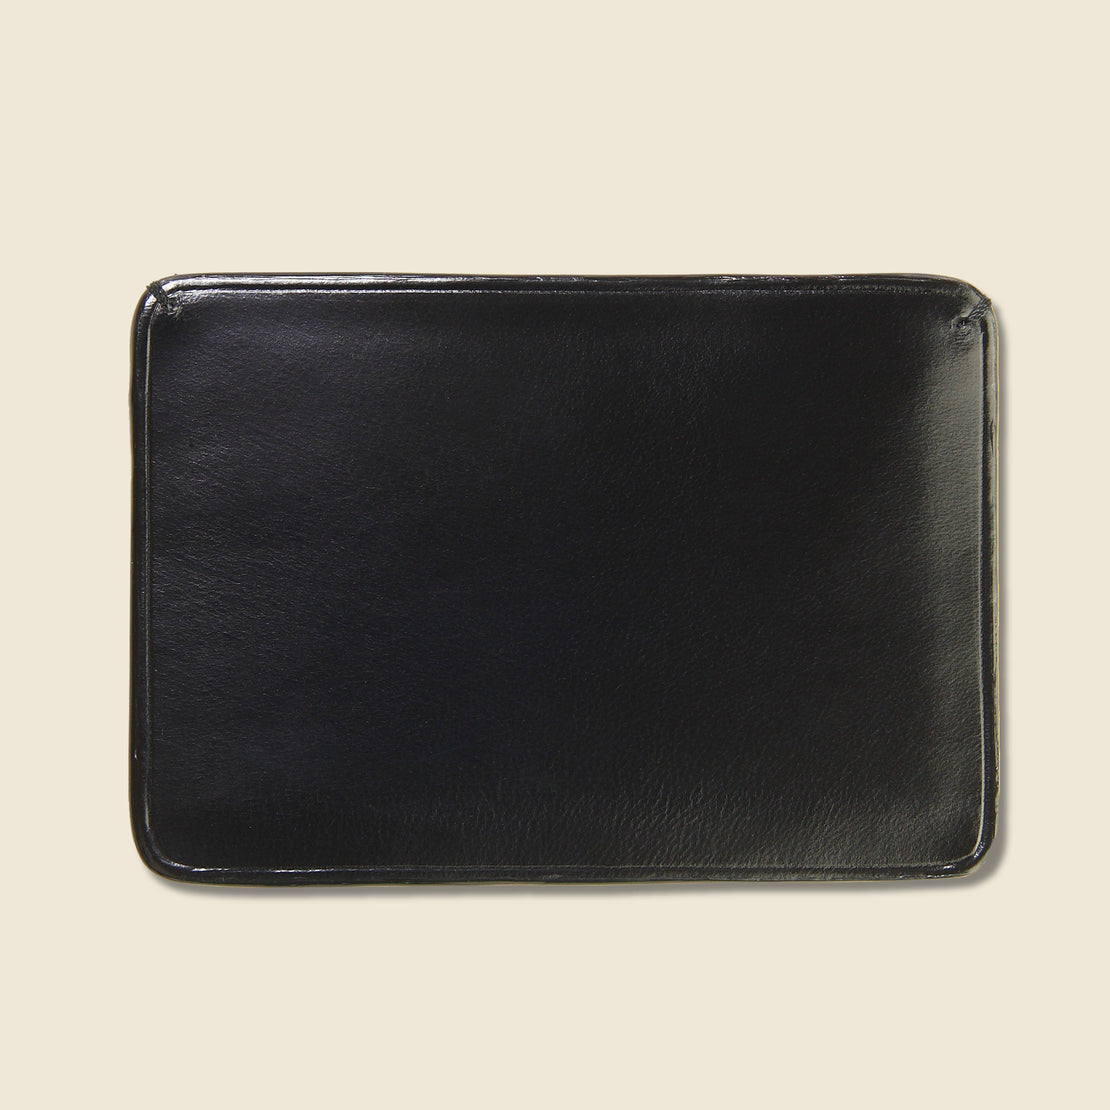 Credit Card Case - Black - Il Bussetto - STAG Provisions - Accessories - Wallets